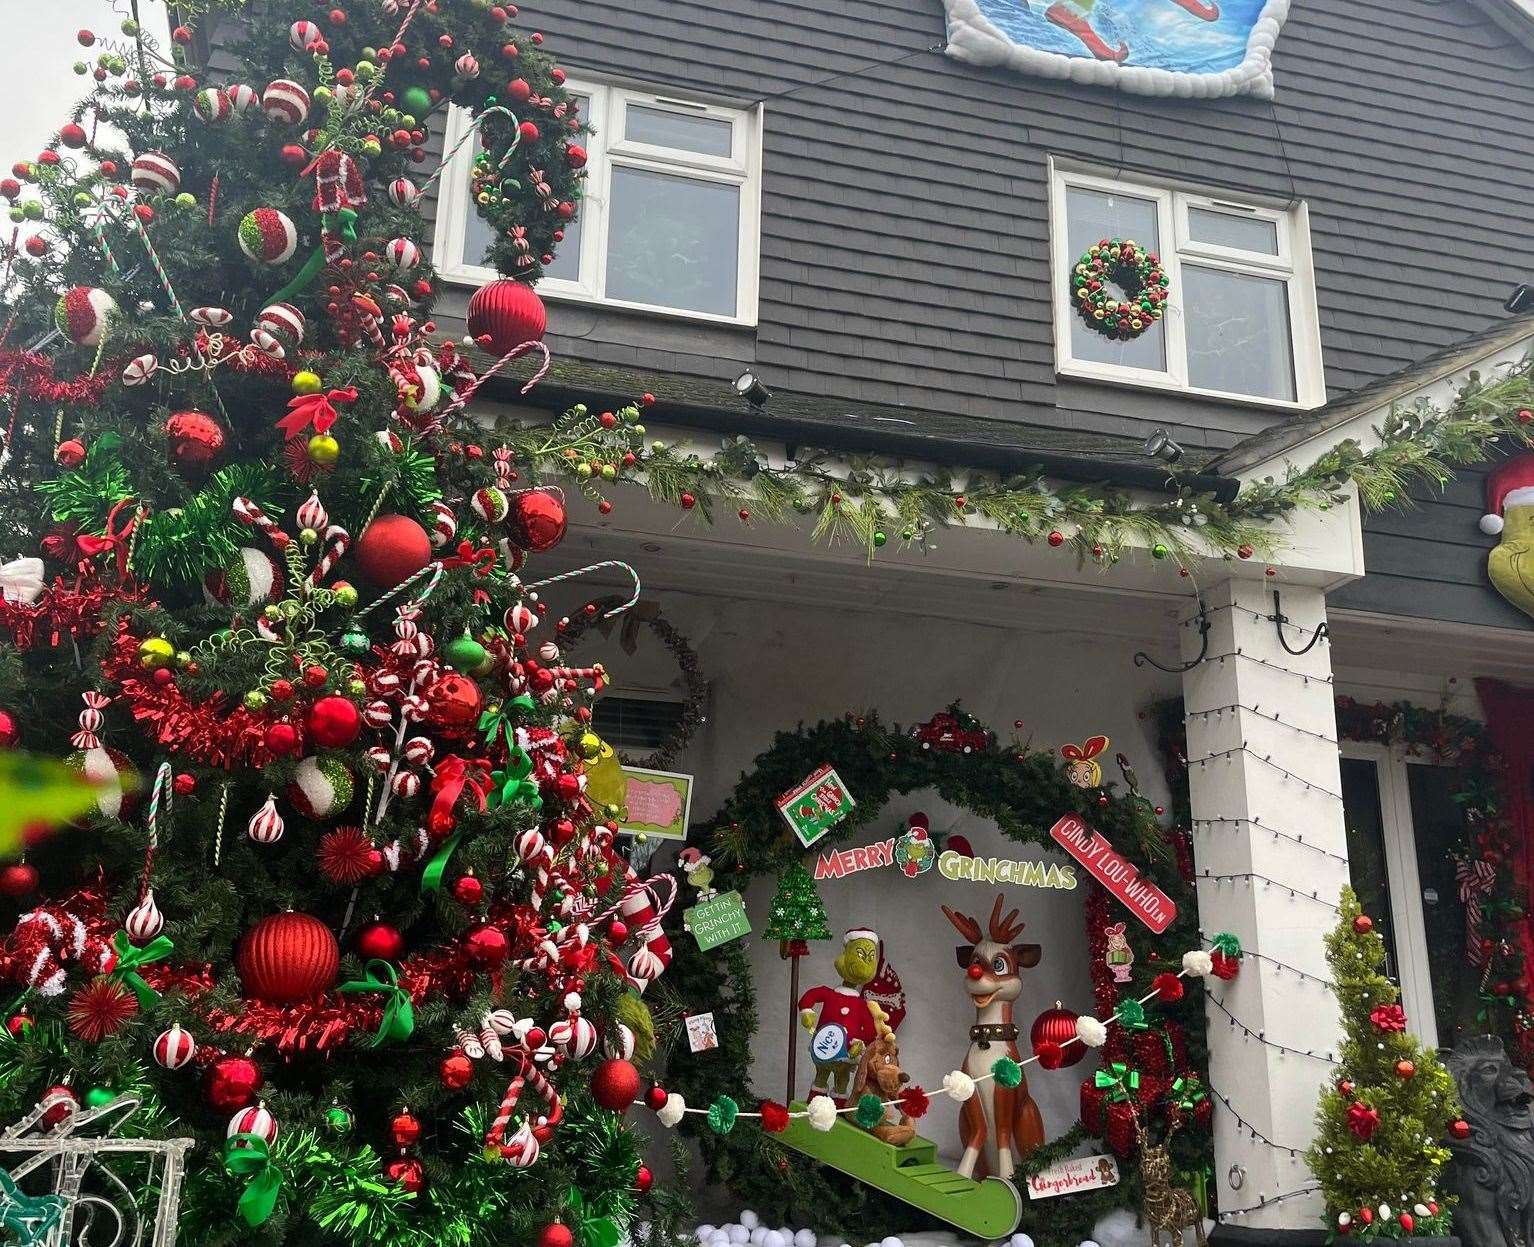 The Hedges' Whoville Christmas display. Picture: Lavinia Hedges